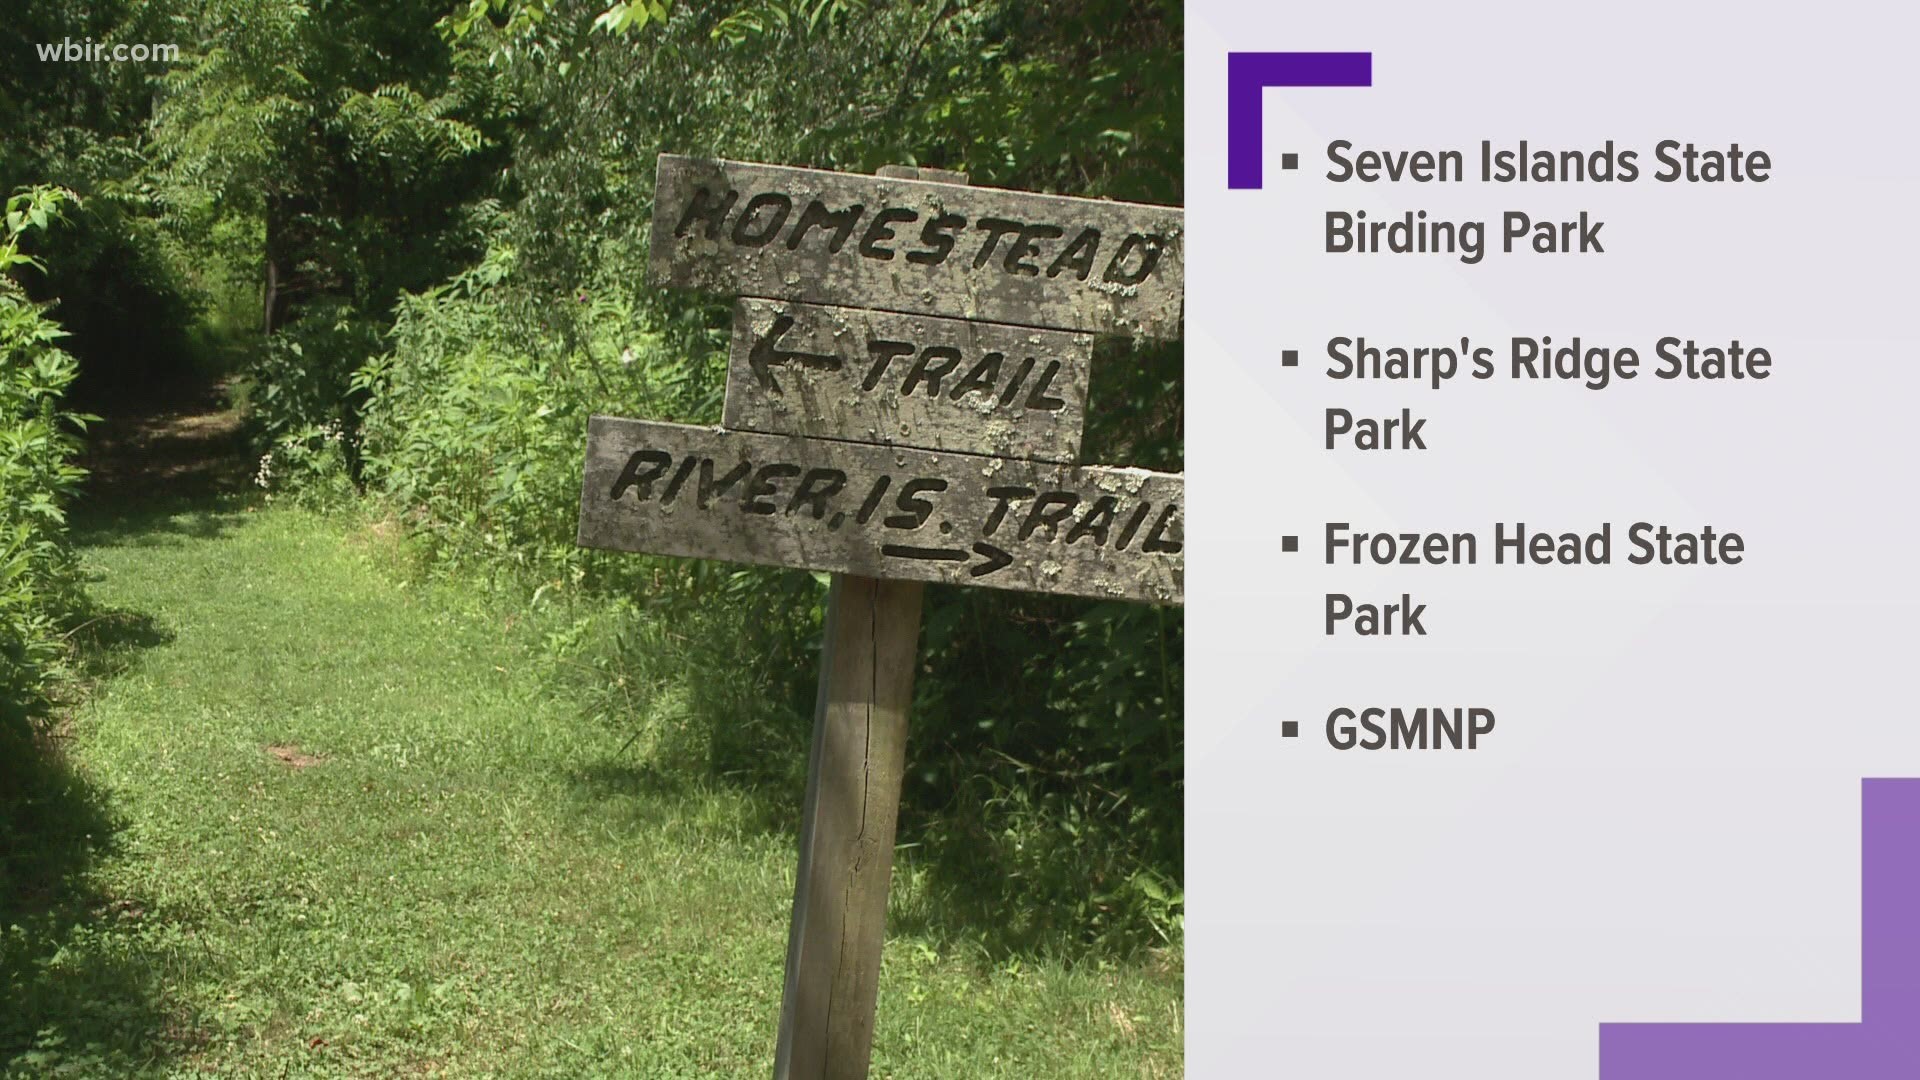 There is no shortage of birdwatching spots in East Tennessee!